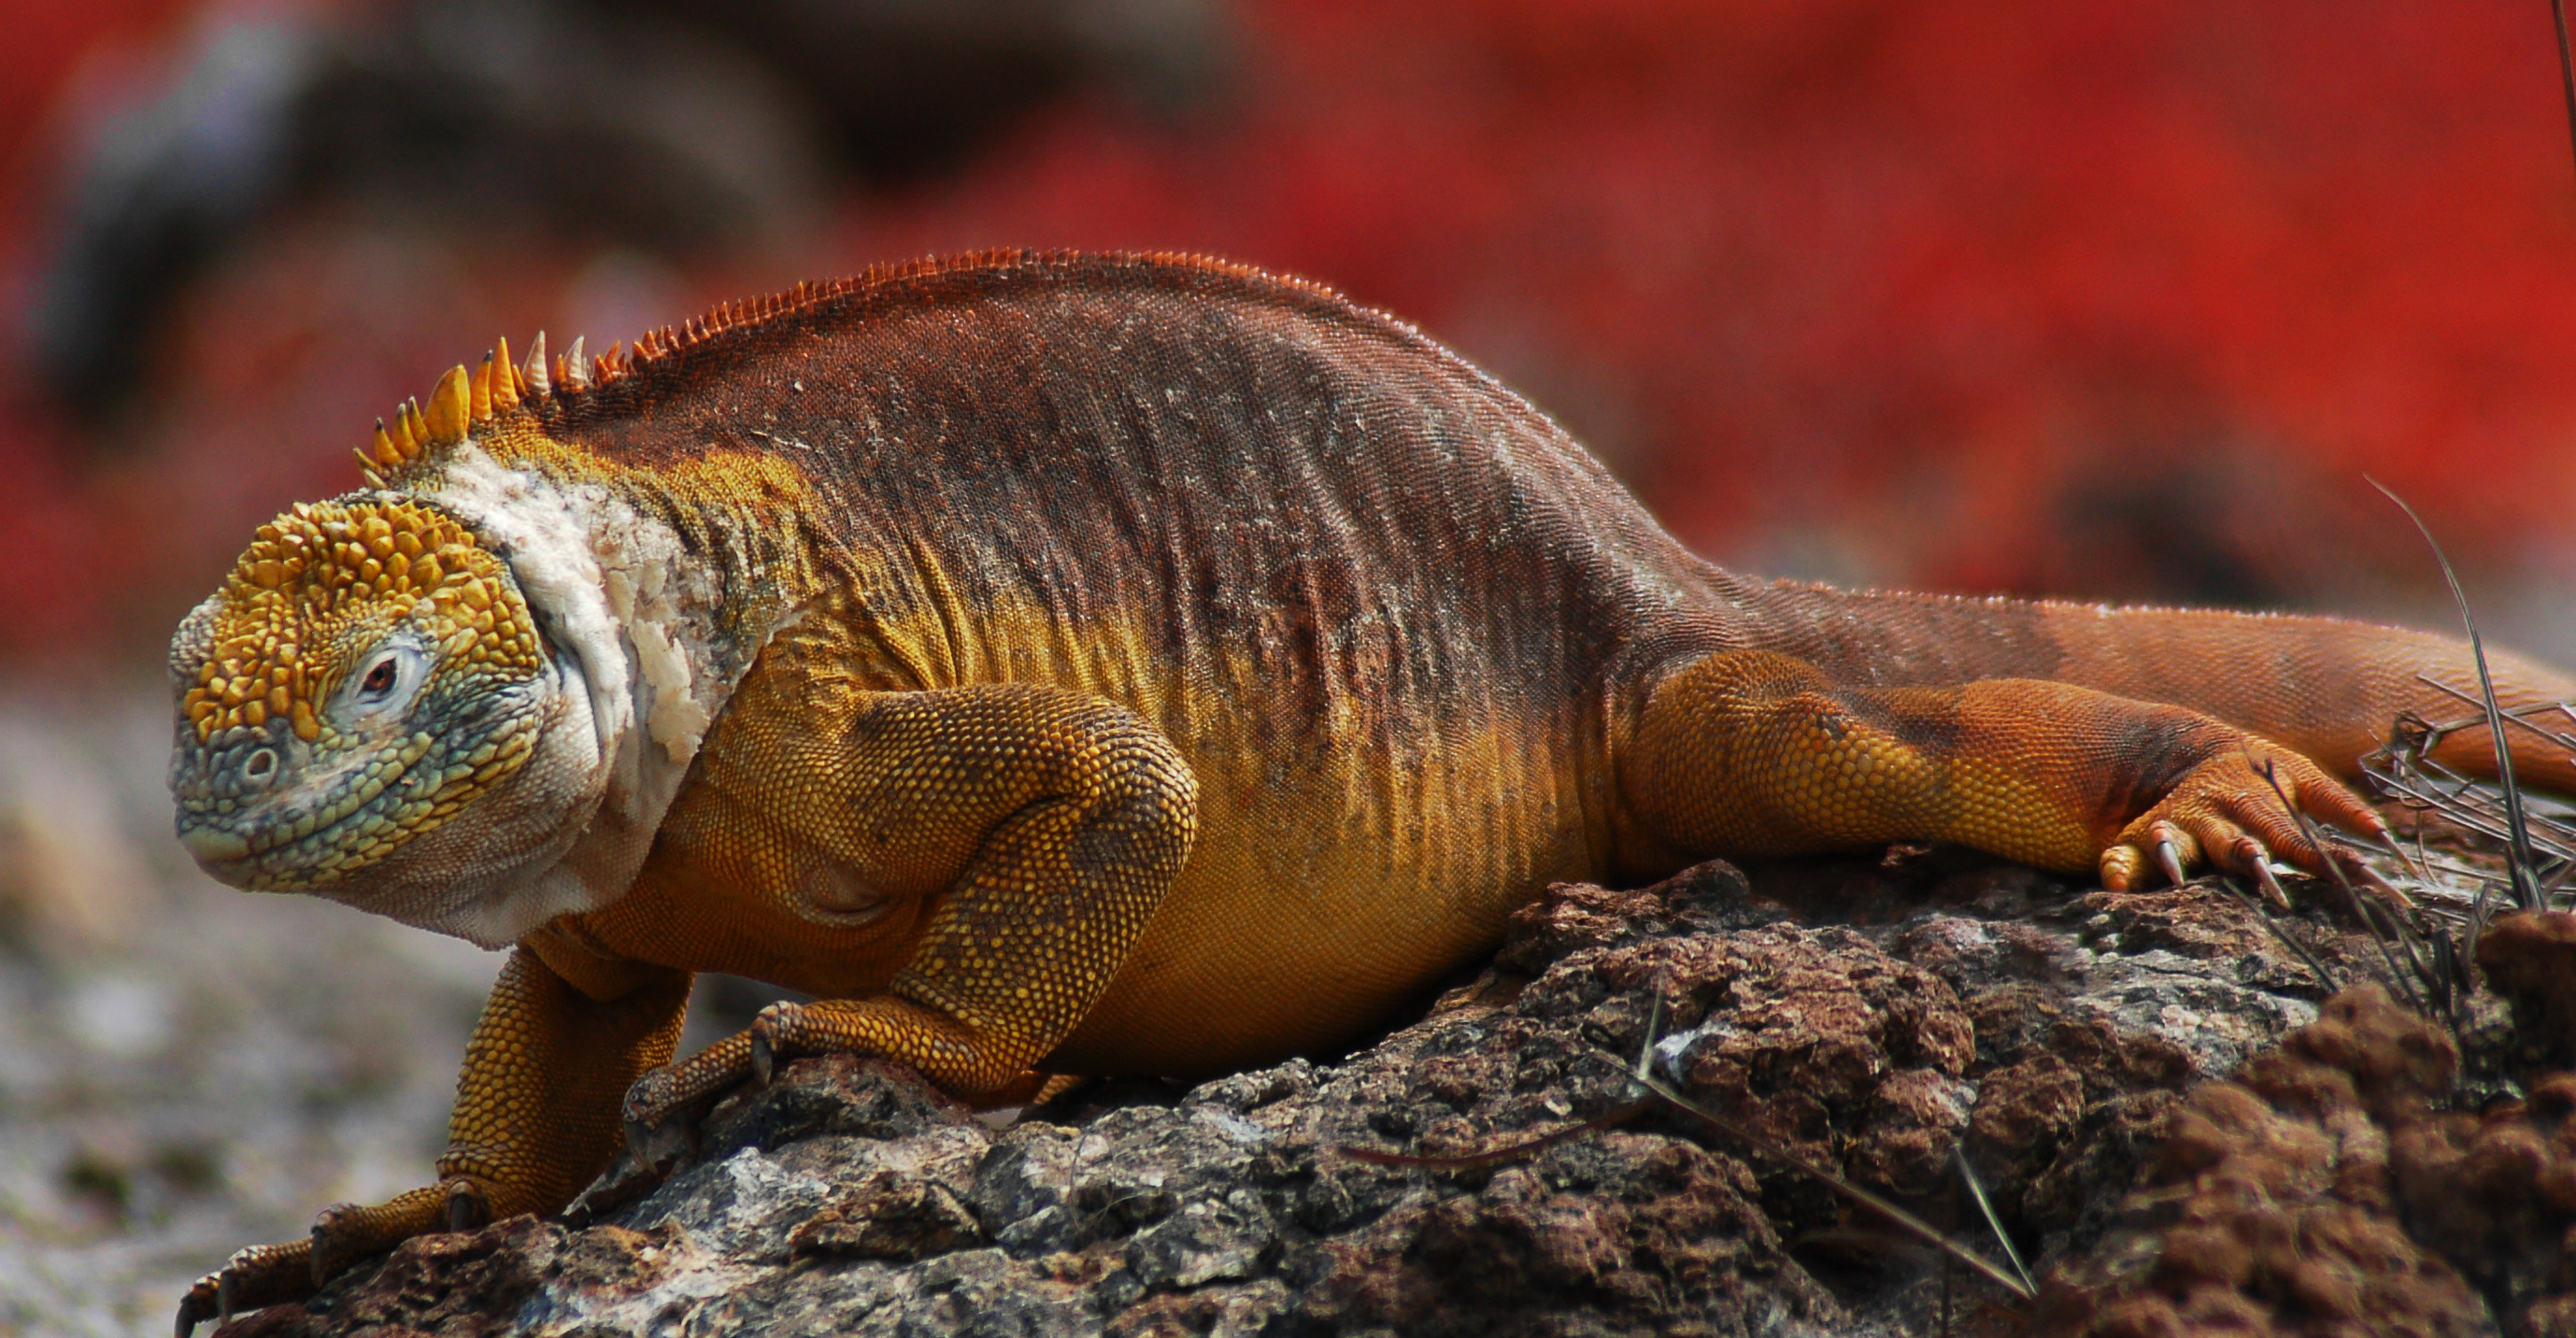 Galapagos Land Iguana Backgrounds, Compatible - PC, Mobile, Gadgets| 2757x1432 px